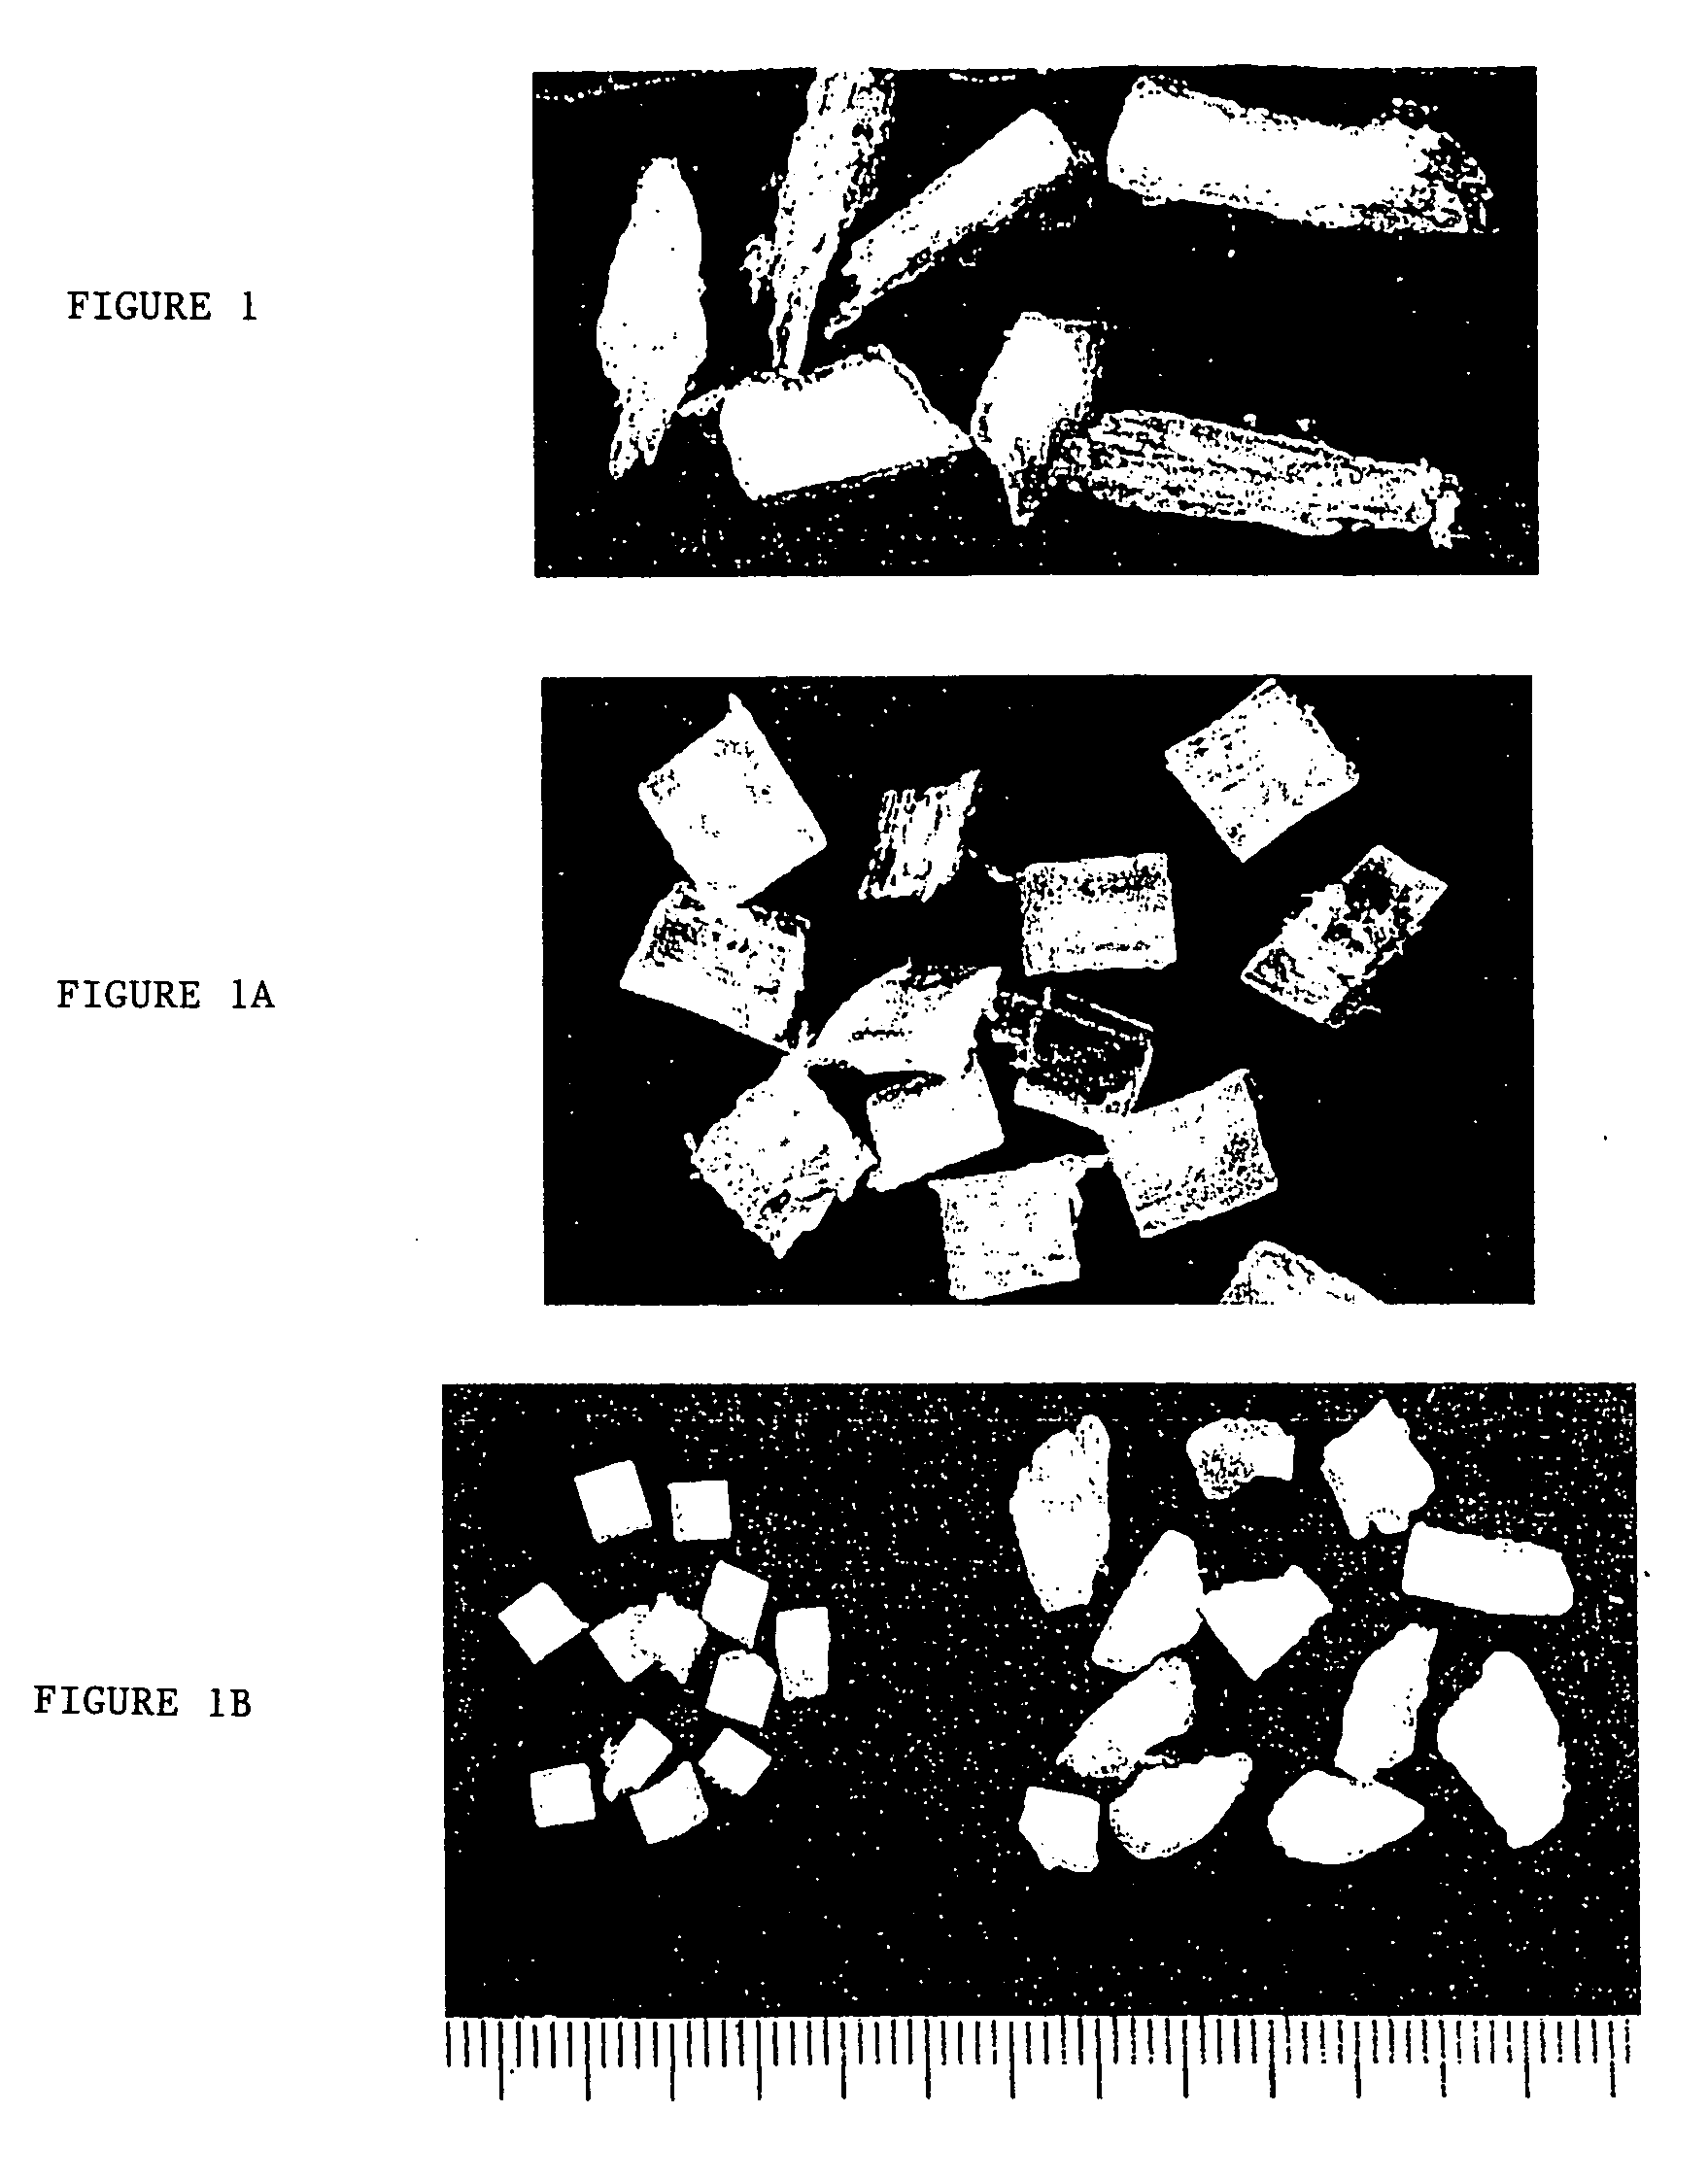 Volume maintaining osteoinductive/osteoconductive compositions